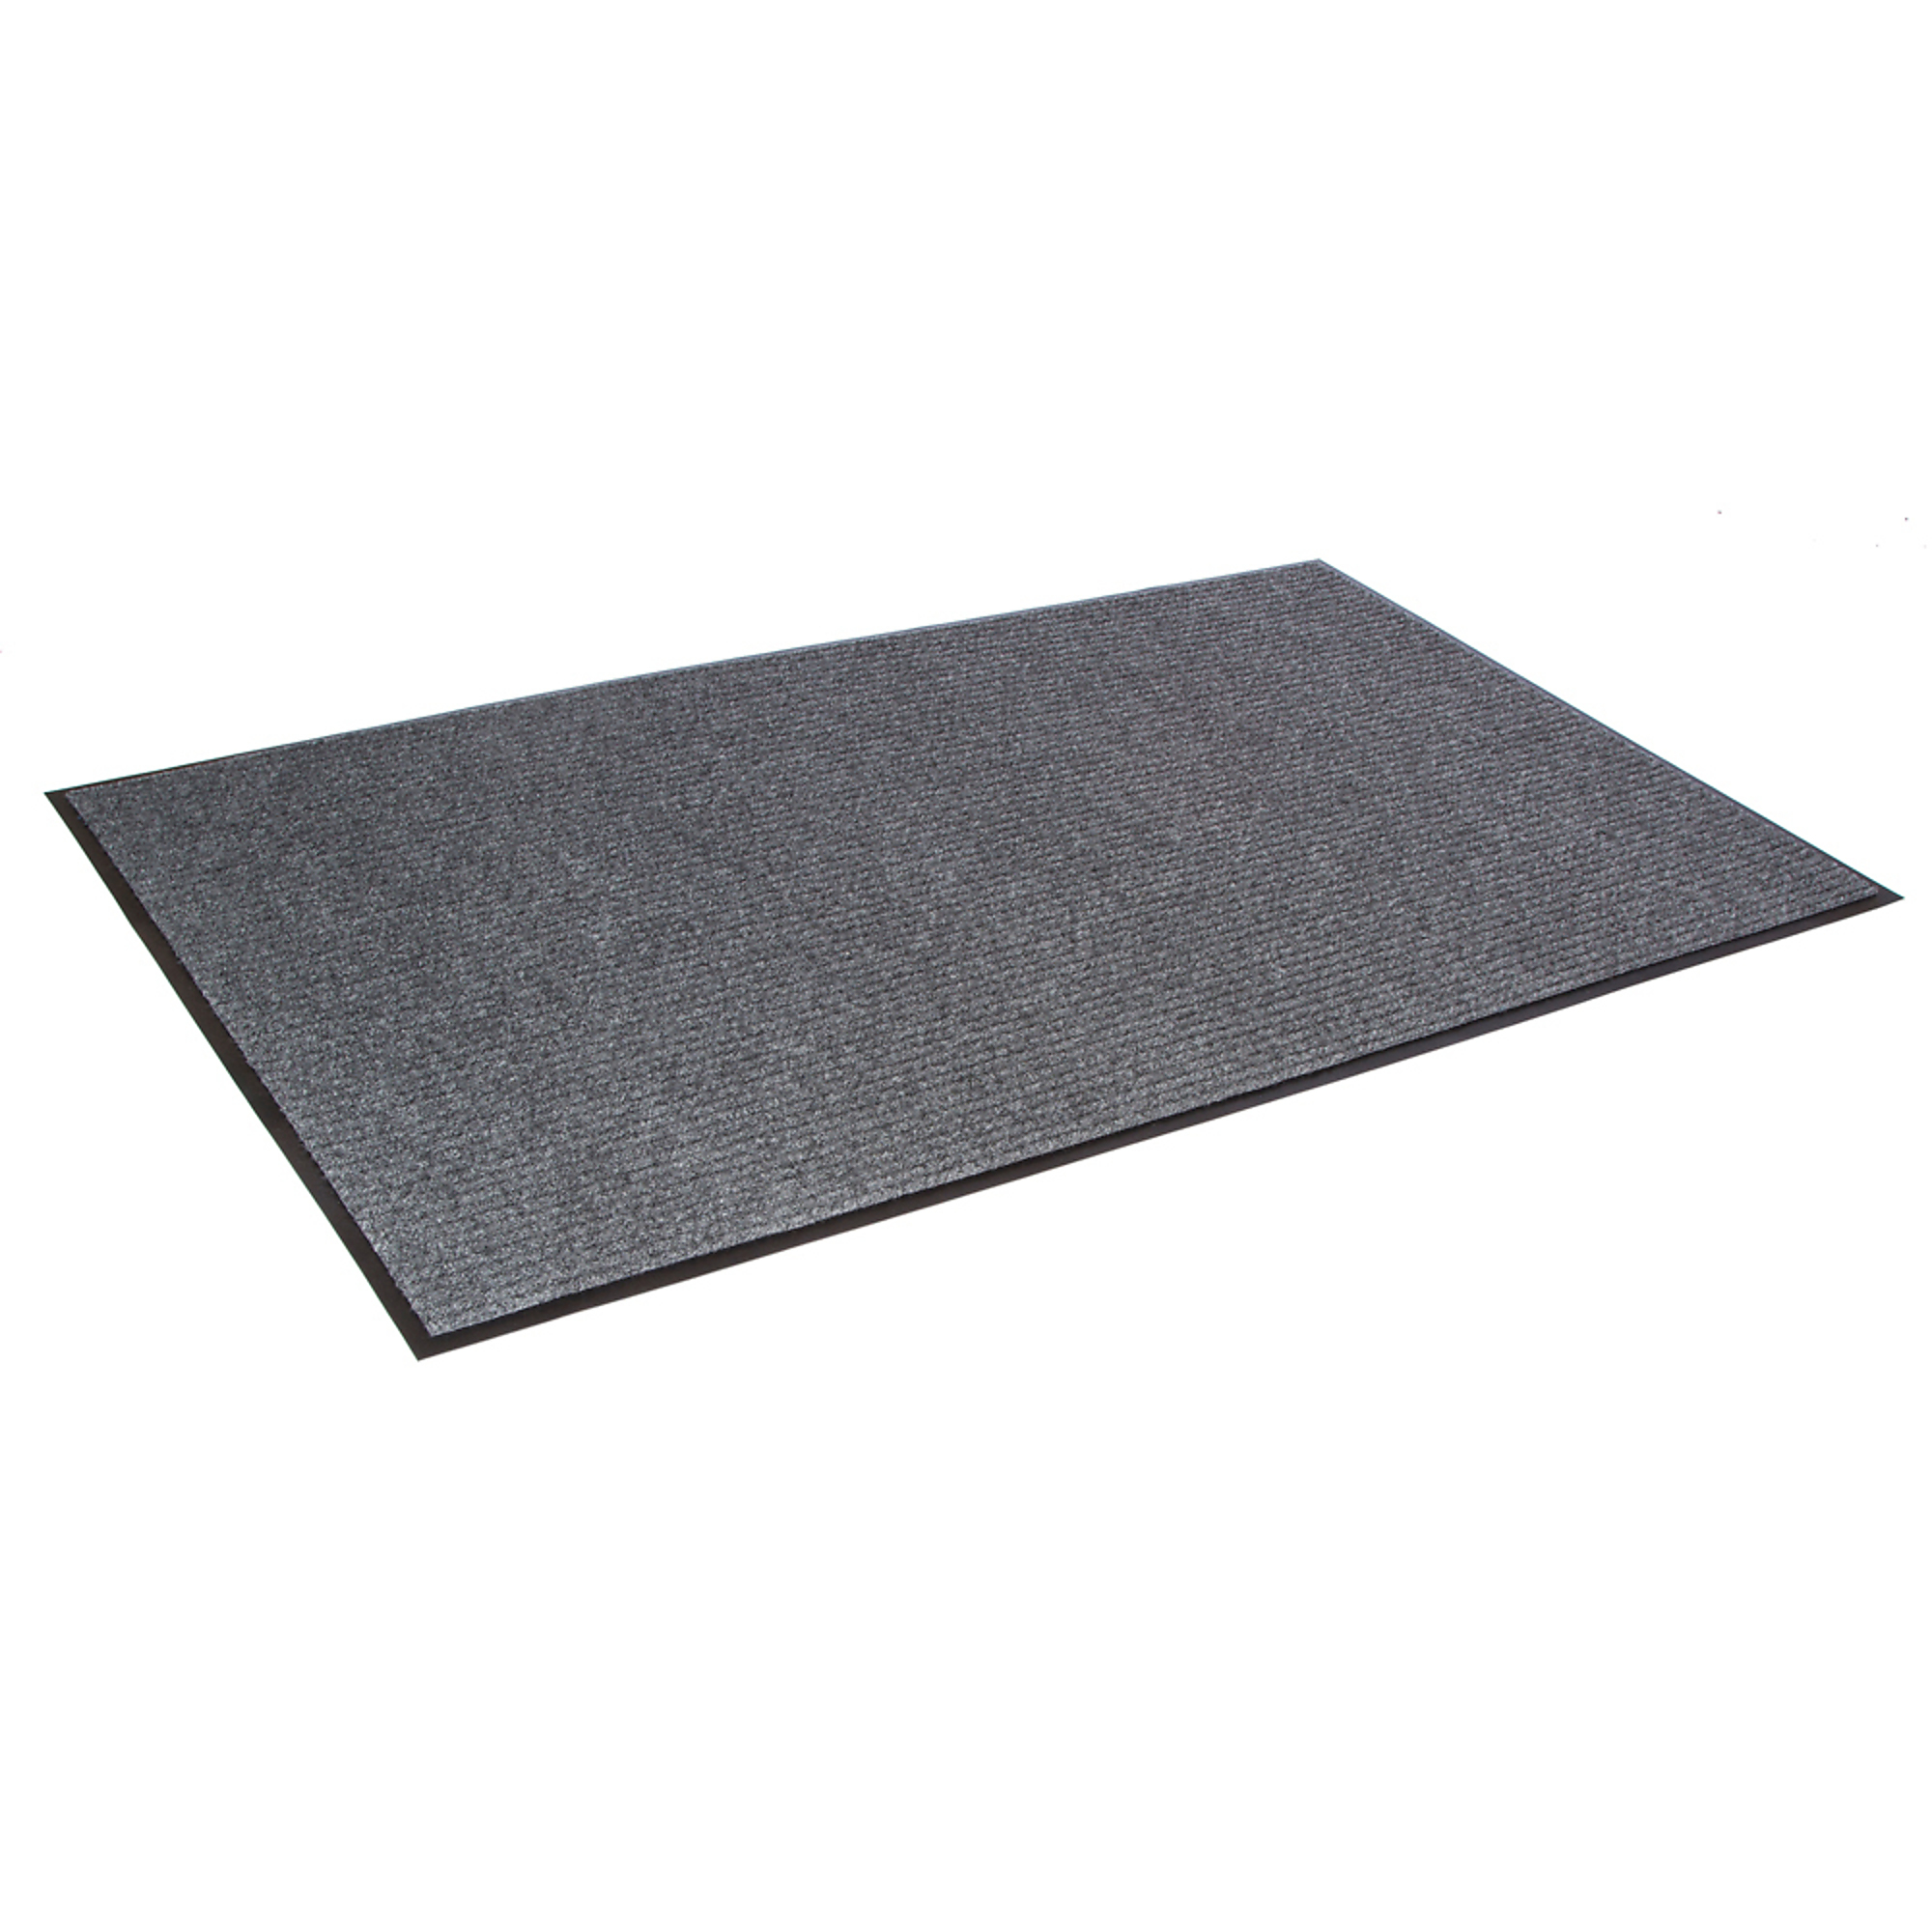 Crown Matting Technologies, Needle-Rib 3ft.x5ft. Gray, Width 36 in, Length 60 in, Thickness 5/16 in, Model NR 0035GY